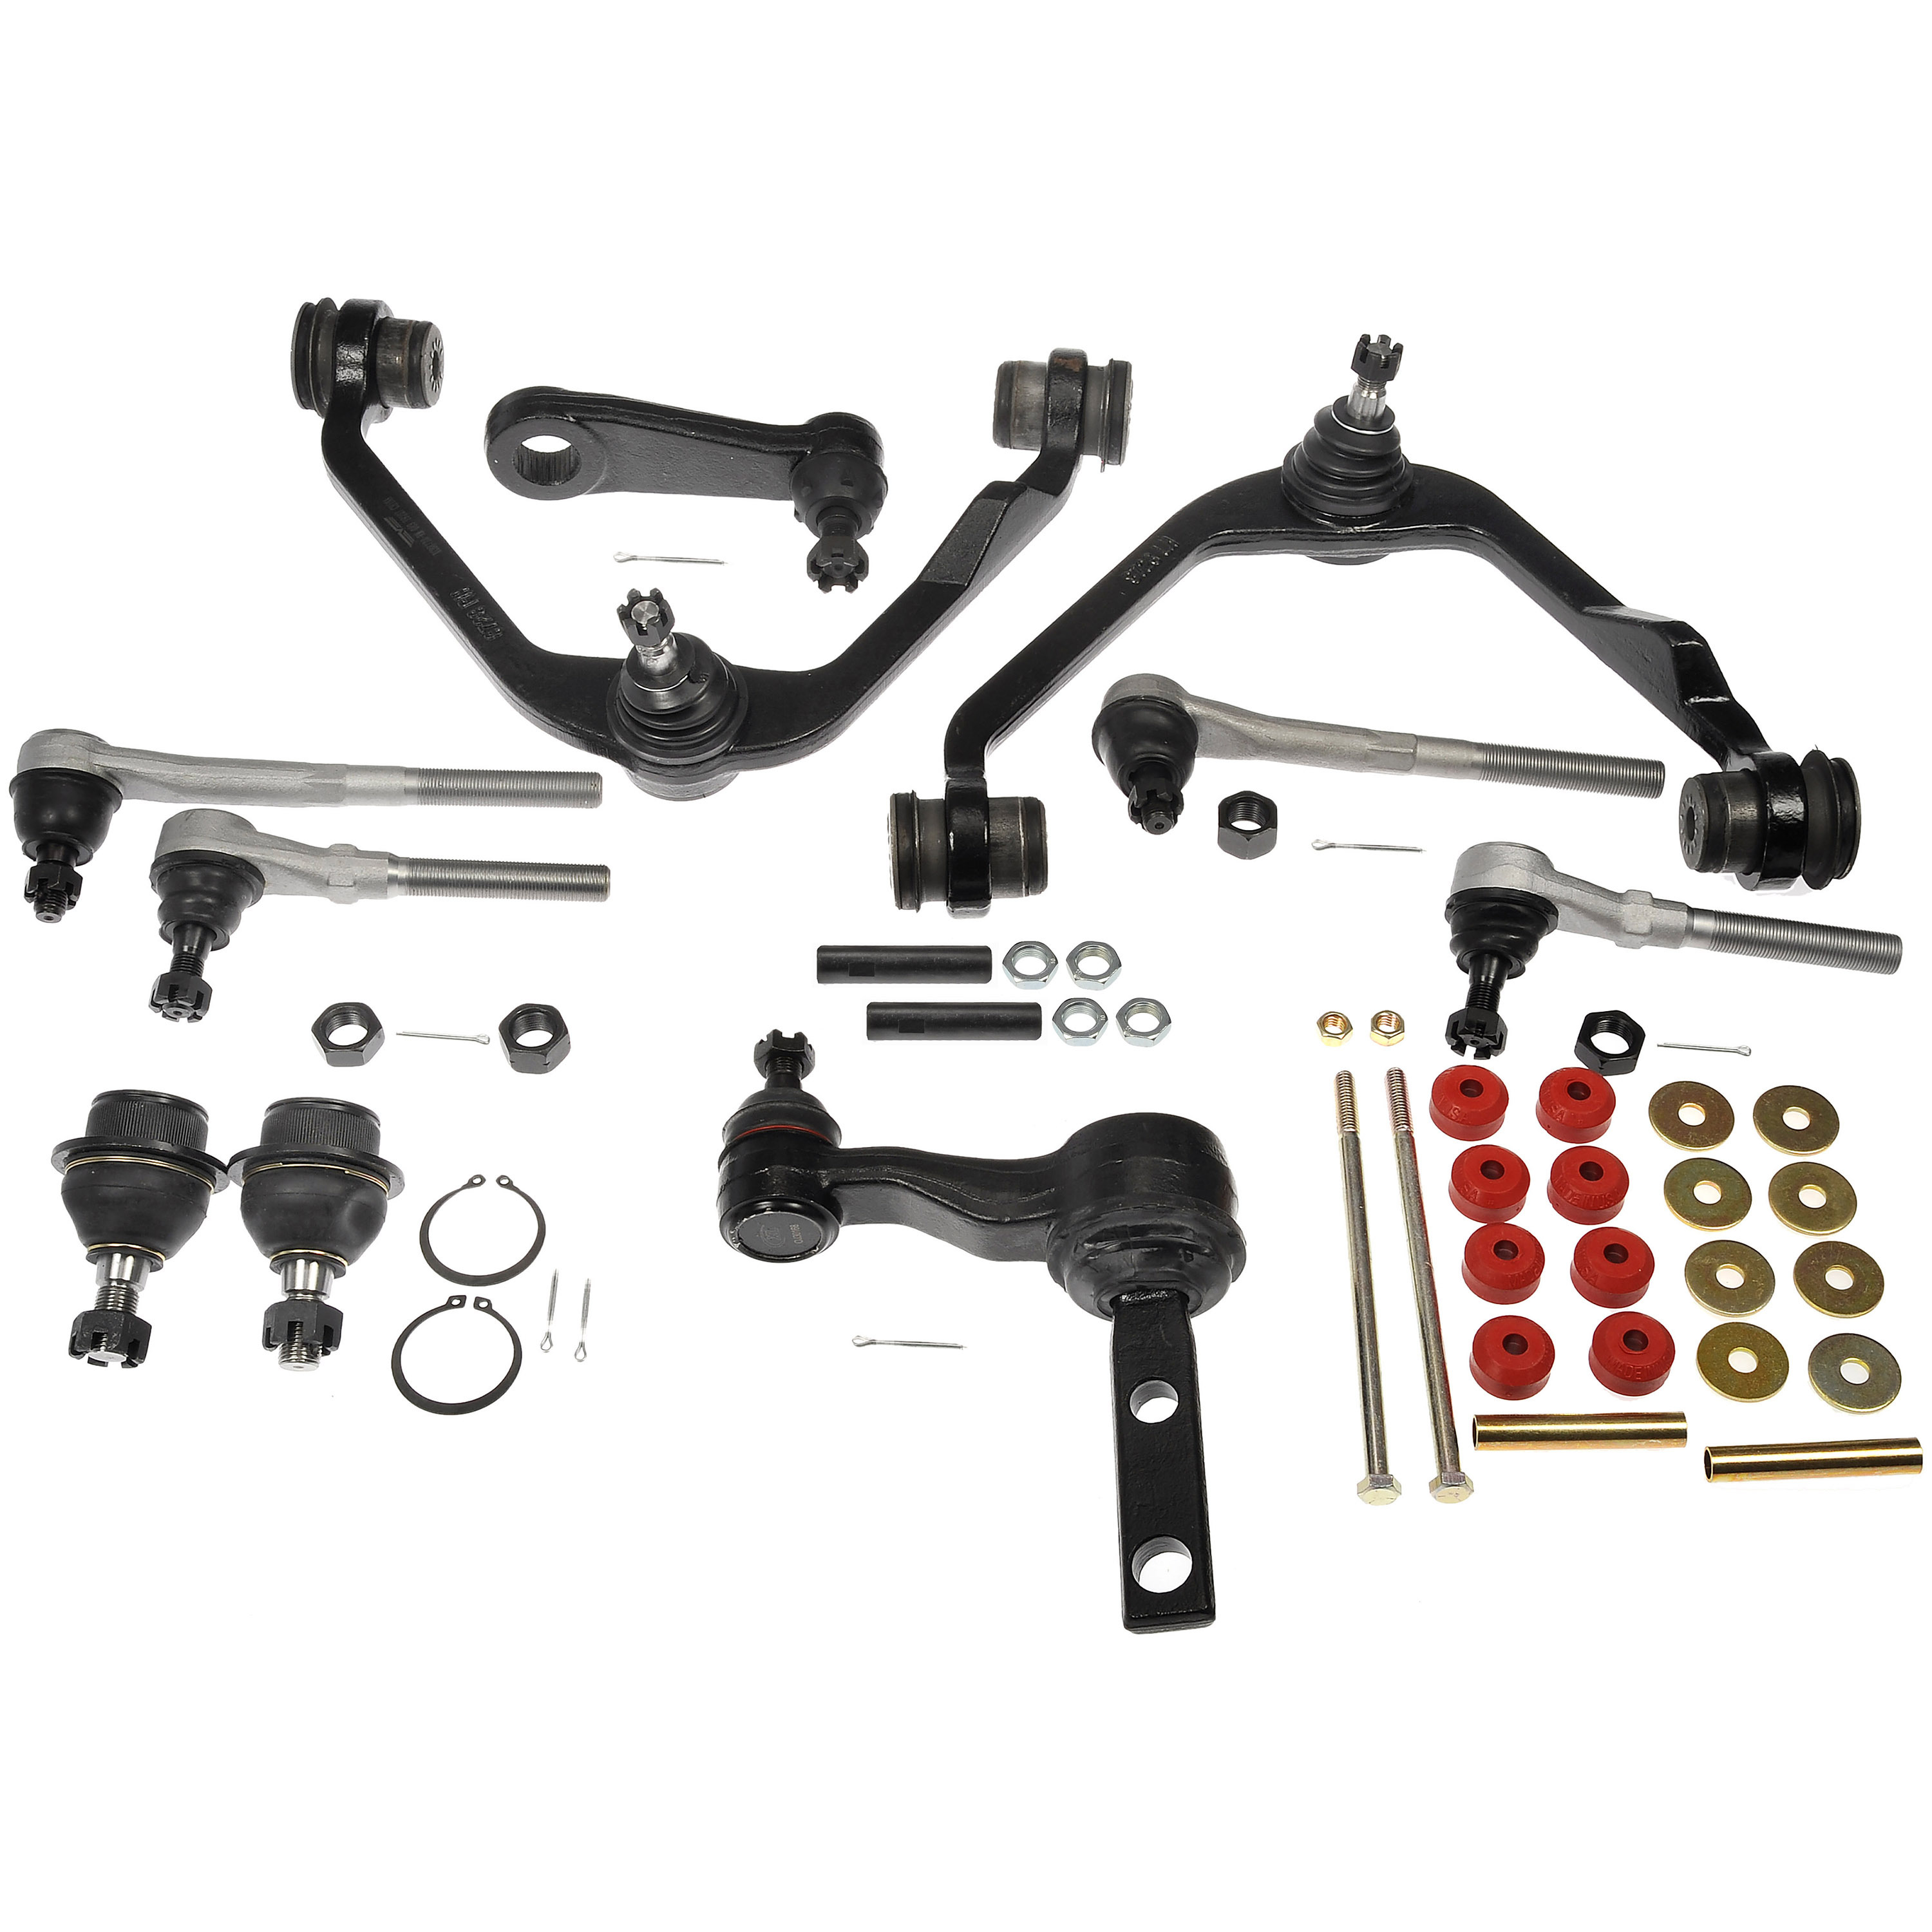 Dorman FEK87029XL Front Suspension Kit for Specific Ford / Lincoln Models Fits select: 1997-2003 FORD F150, 1997-2002 FORD EXPEDITION - image 2 of 5